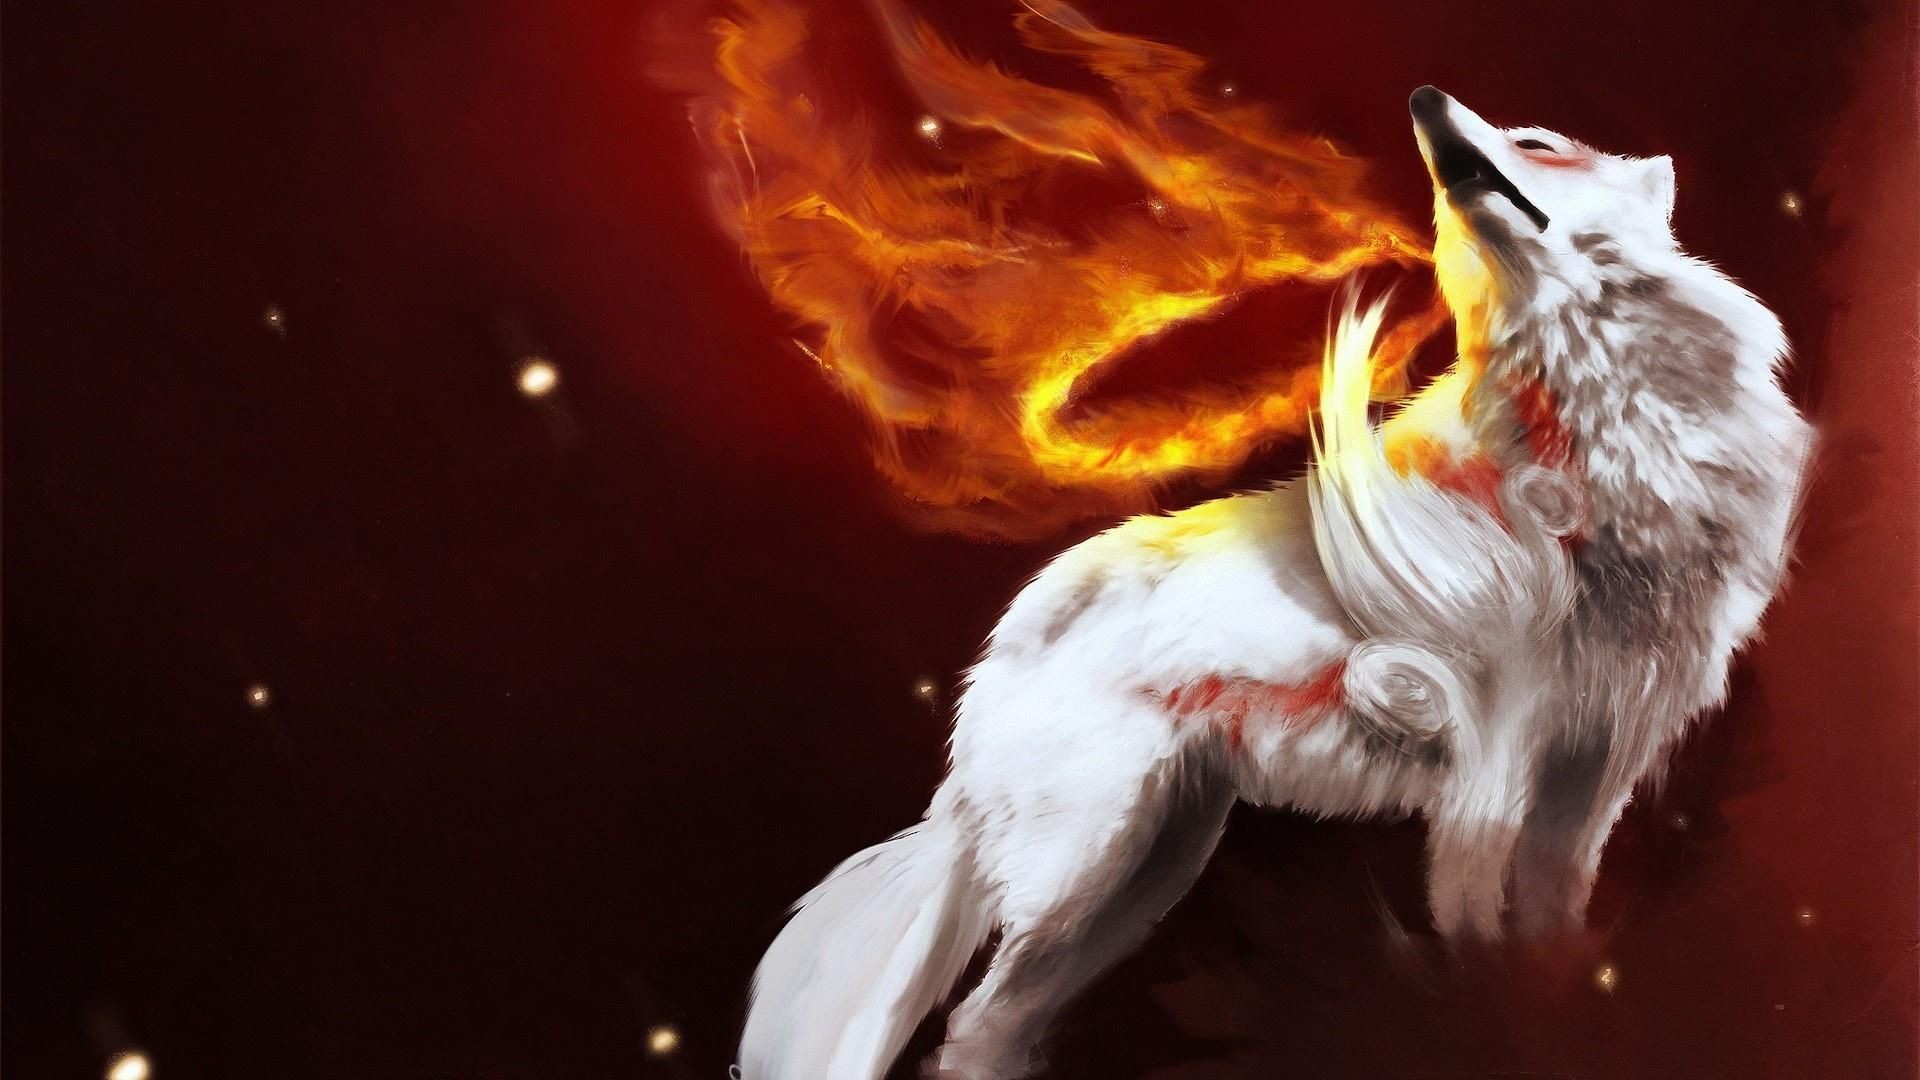 1920x1080 Cool White Wild Werewolf In Fire Sky Animal Desktop Wallpapers Creative  Graphics Nature Picture Cool Wallpapers